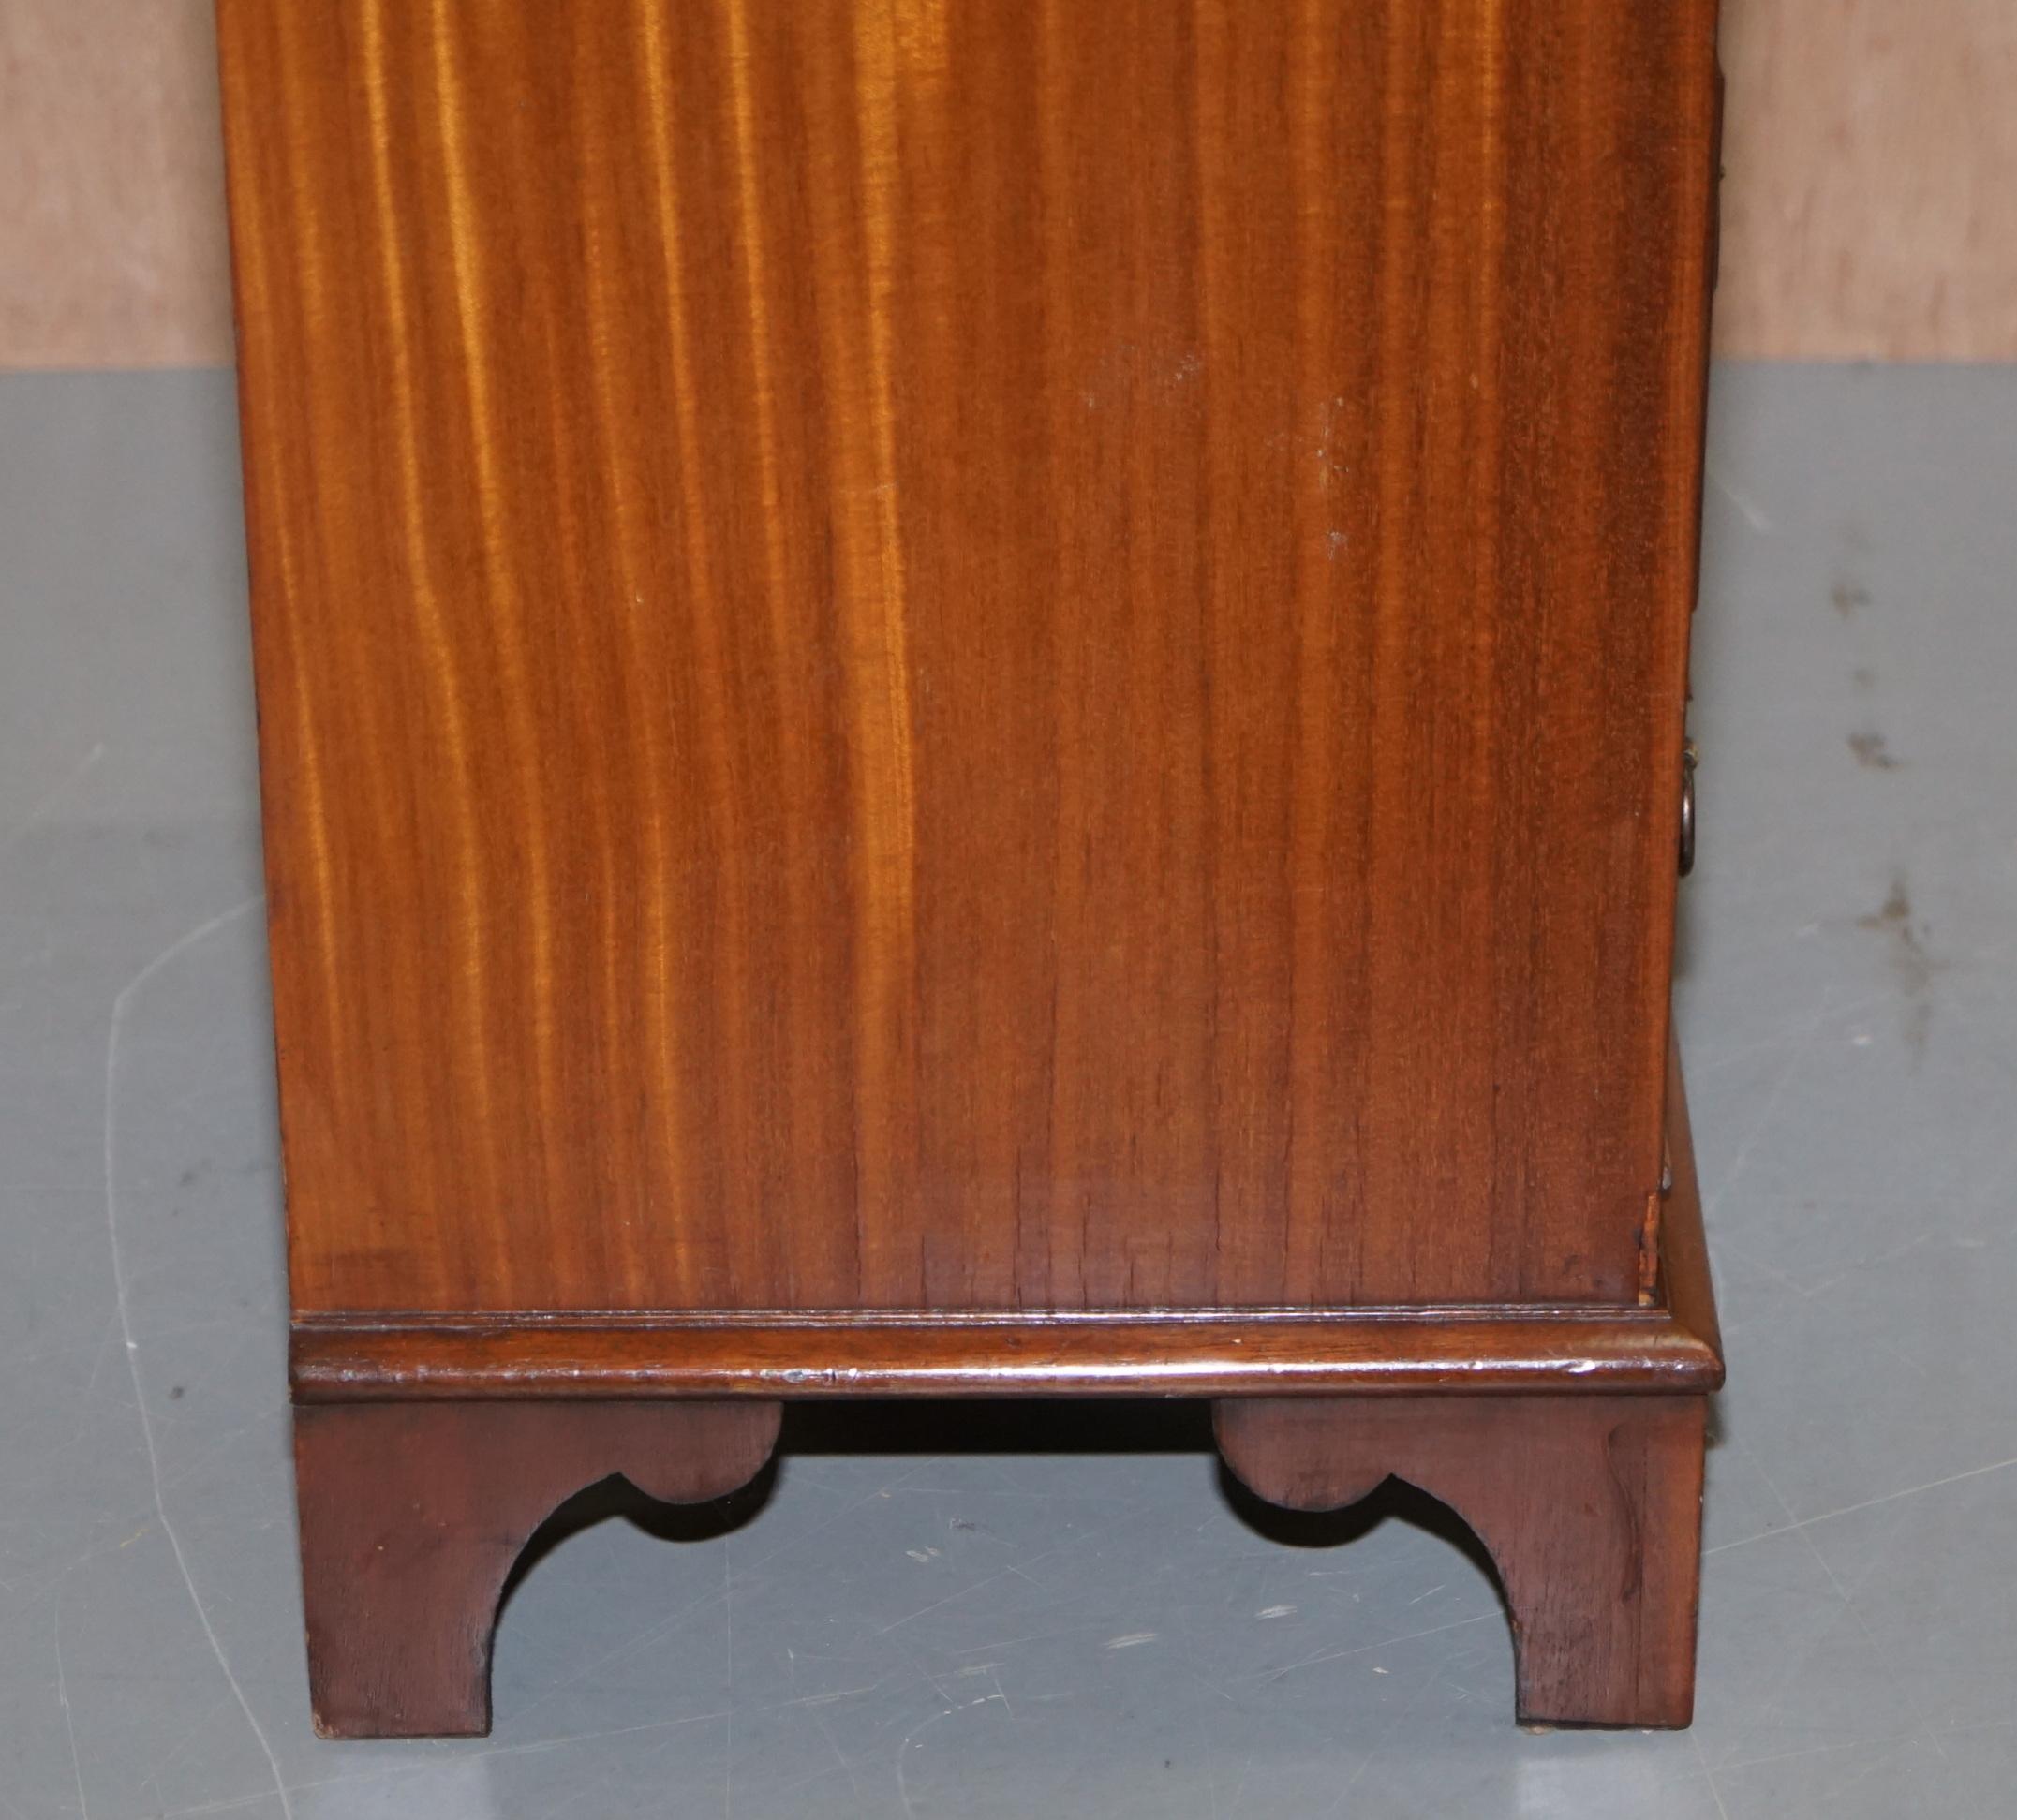 Hand-Crafted Stunning Walnut & Hardwood Chest of Drawers Lamp End Wine Bedside Table Sized